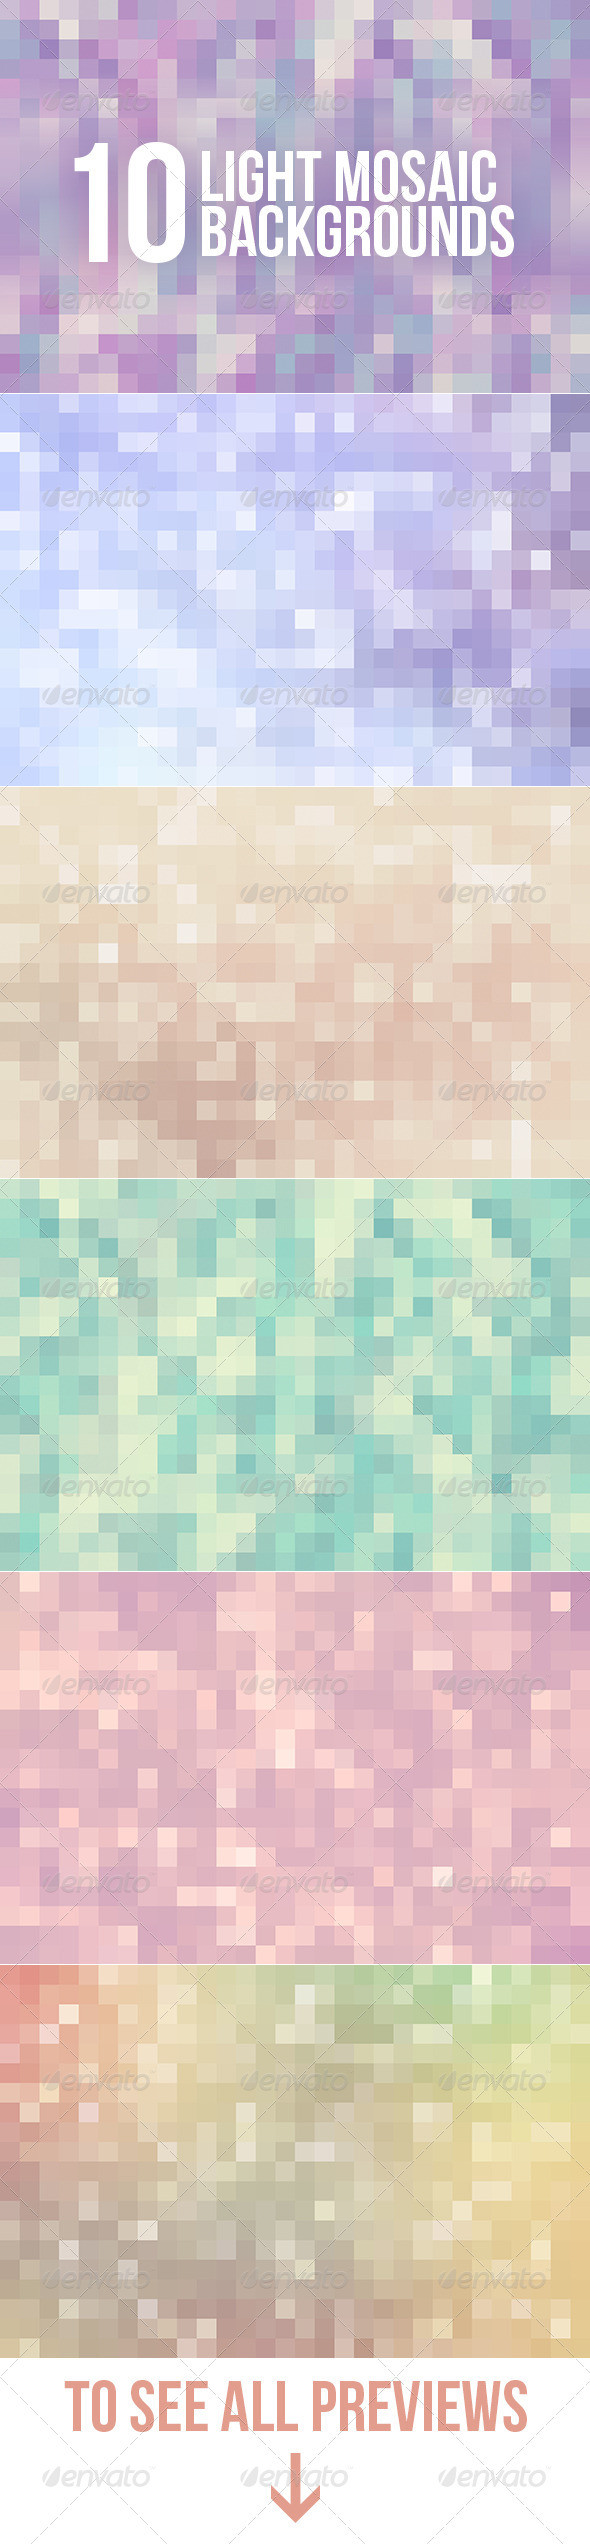 Mosaic backgrounds preview